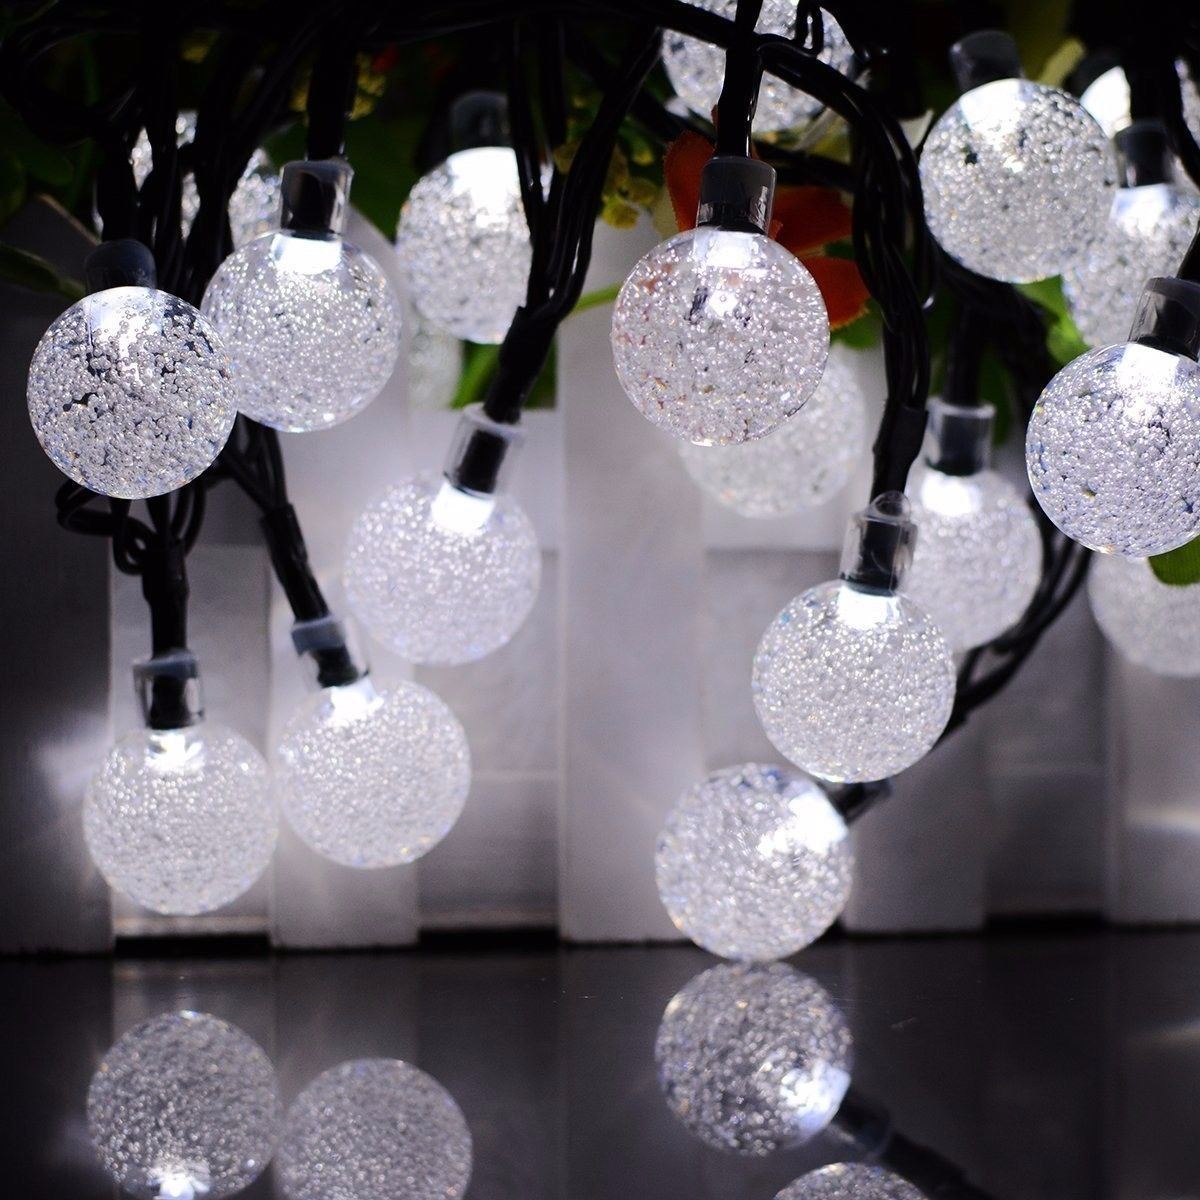 20ft 30 LED Solar String Ball Lights Outdoor Waterproof Garden Decor Cold White - image 1 of 3